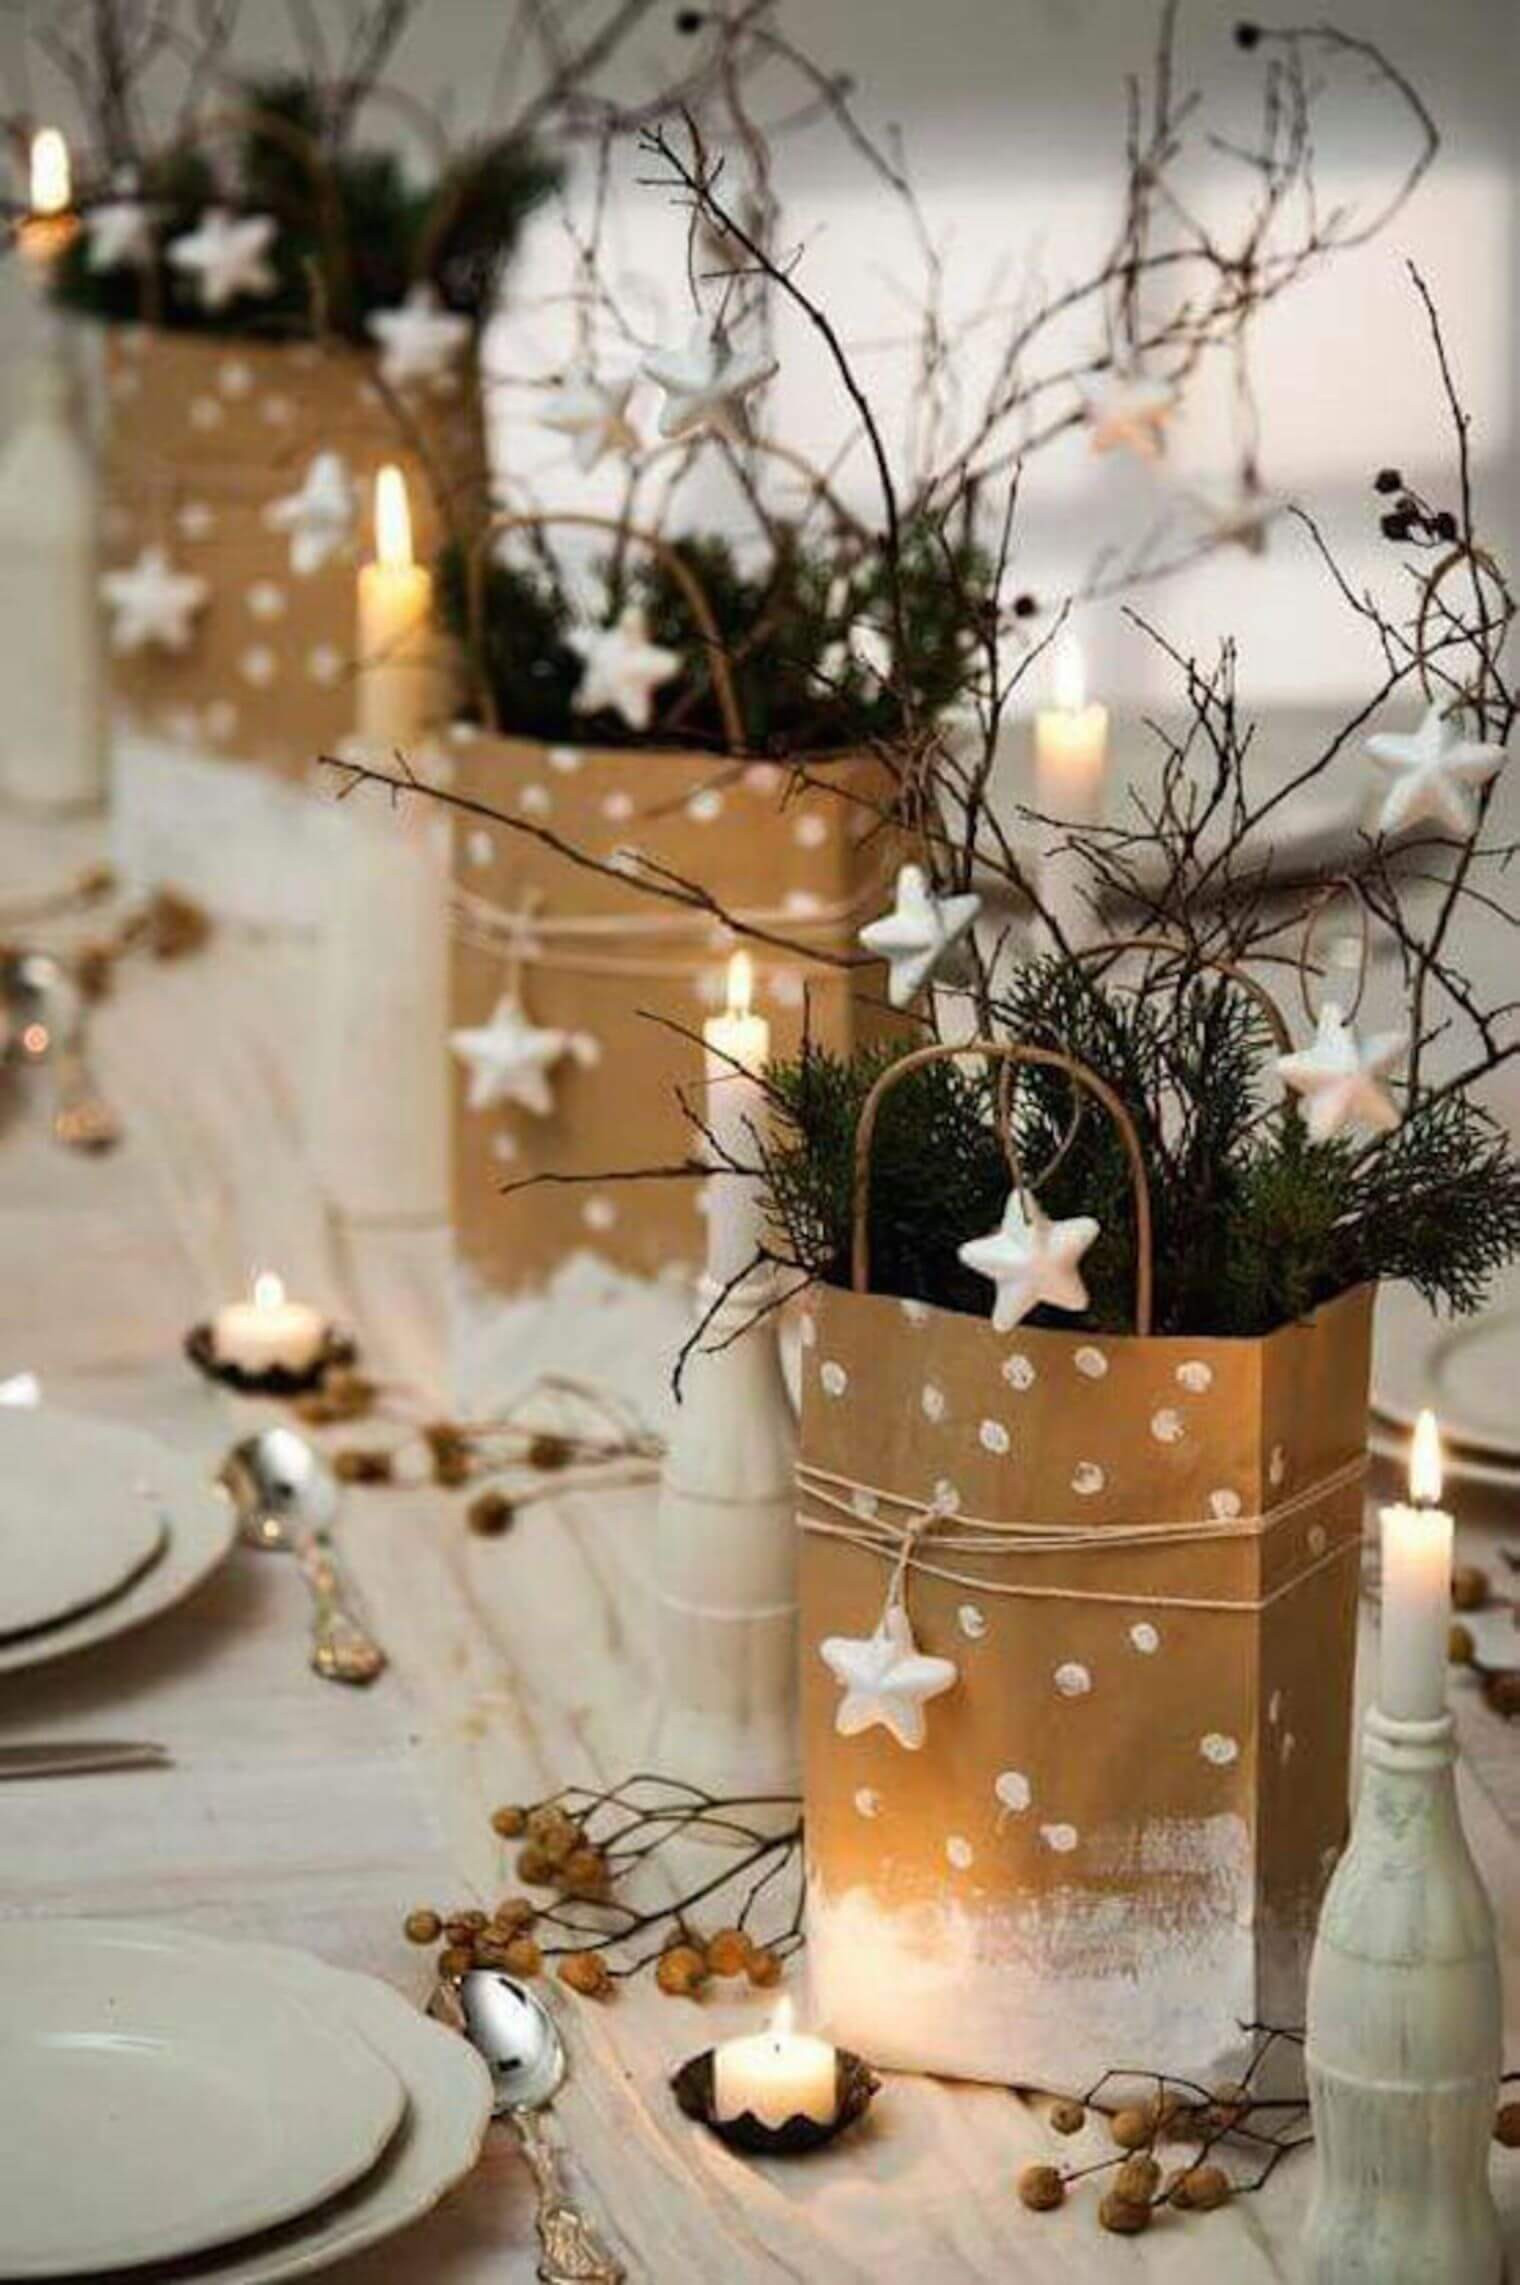 DIY Christmas Table Centerpiece
 28 Best DIY Christmas Centerpieces Ideas and Designs for